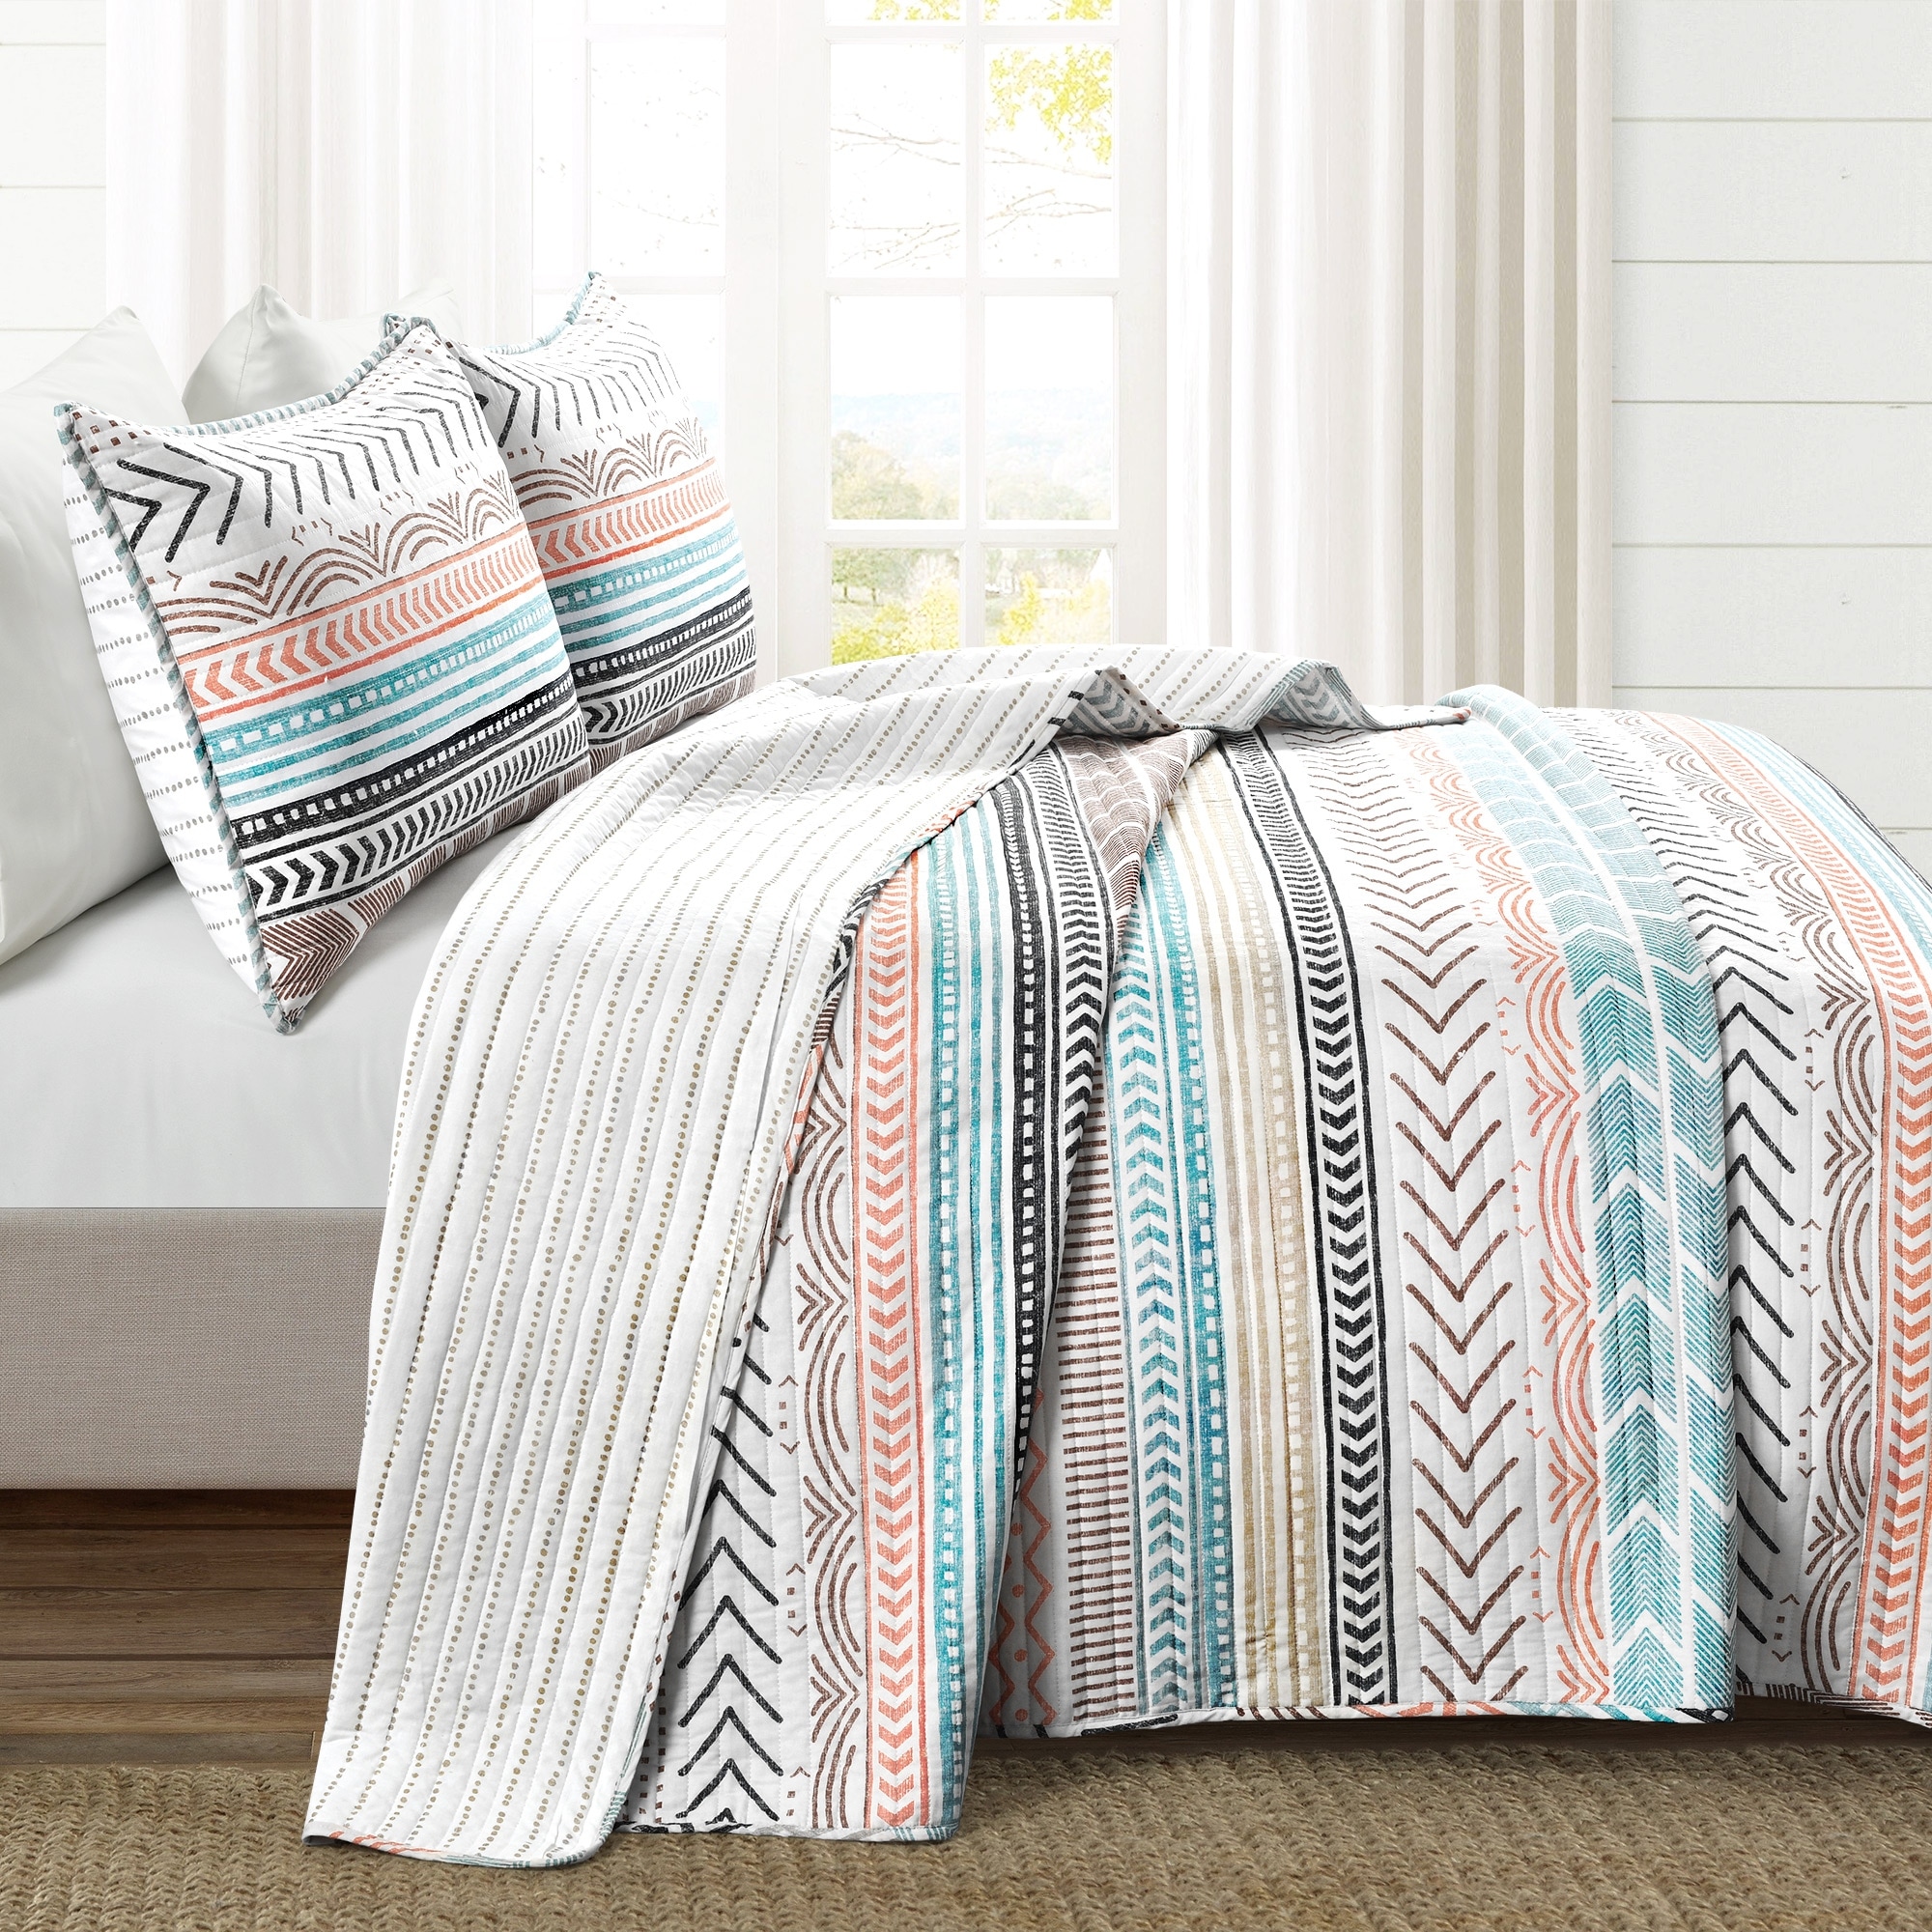 NY&CO Home Idge 3 Piece Quilt Set Y-Shaped Geometric Pattern